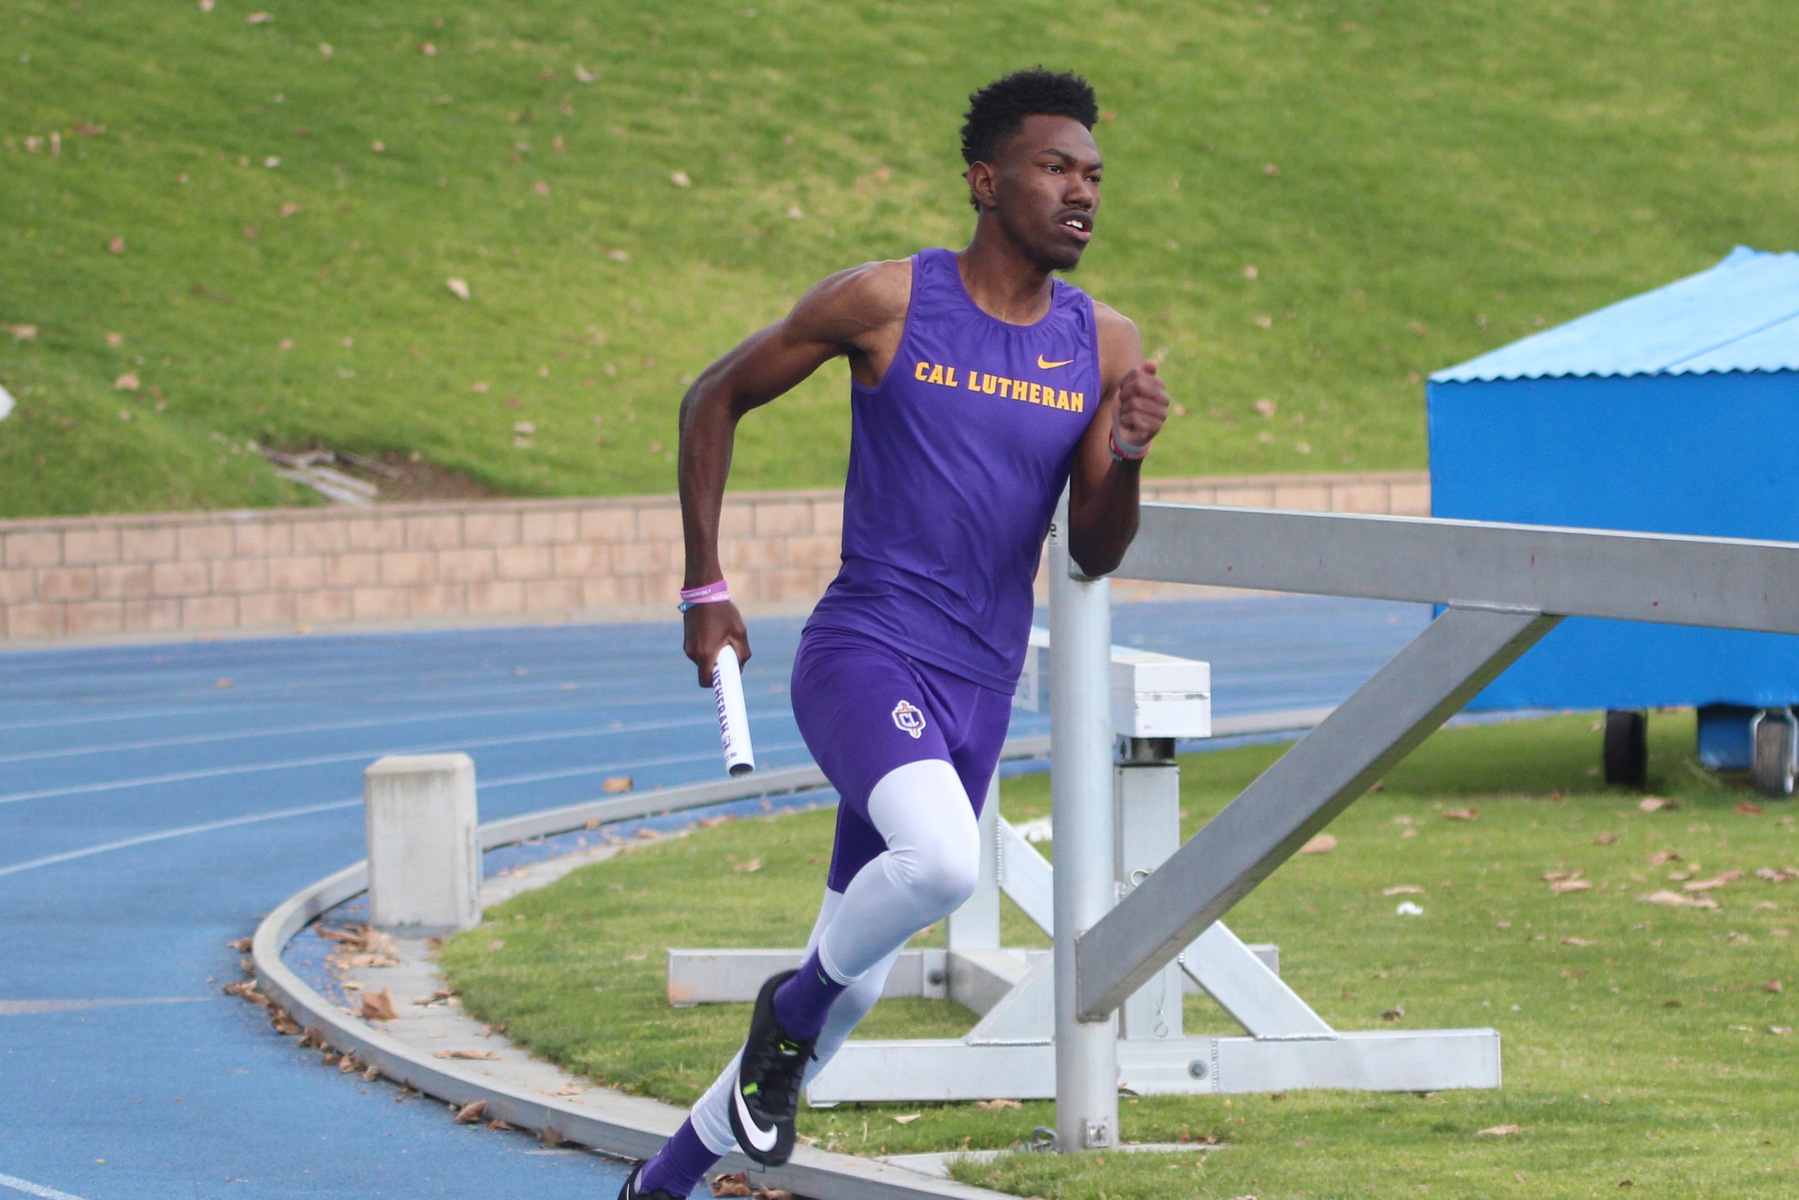 Chris Brodnax was part of the 4x400 relay team that took gold at the SCIAC Multi-Dual Meet #1.